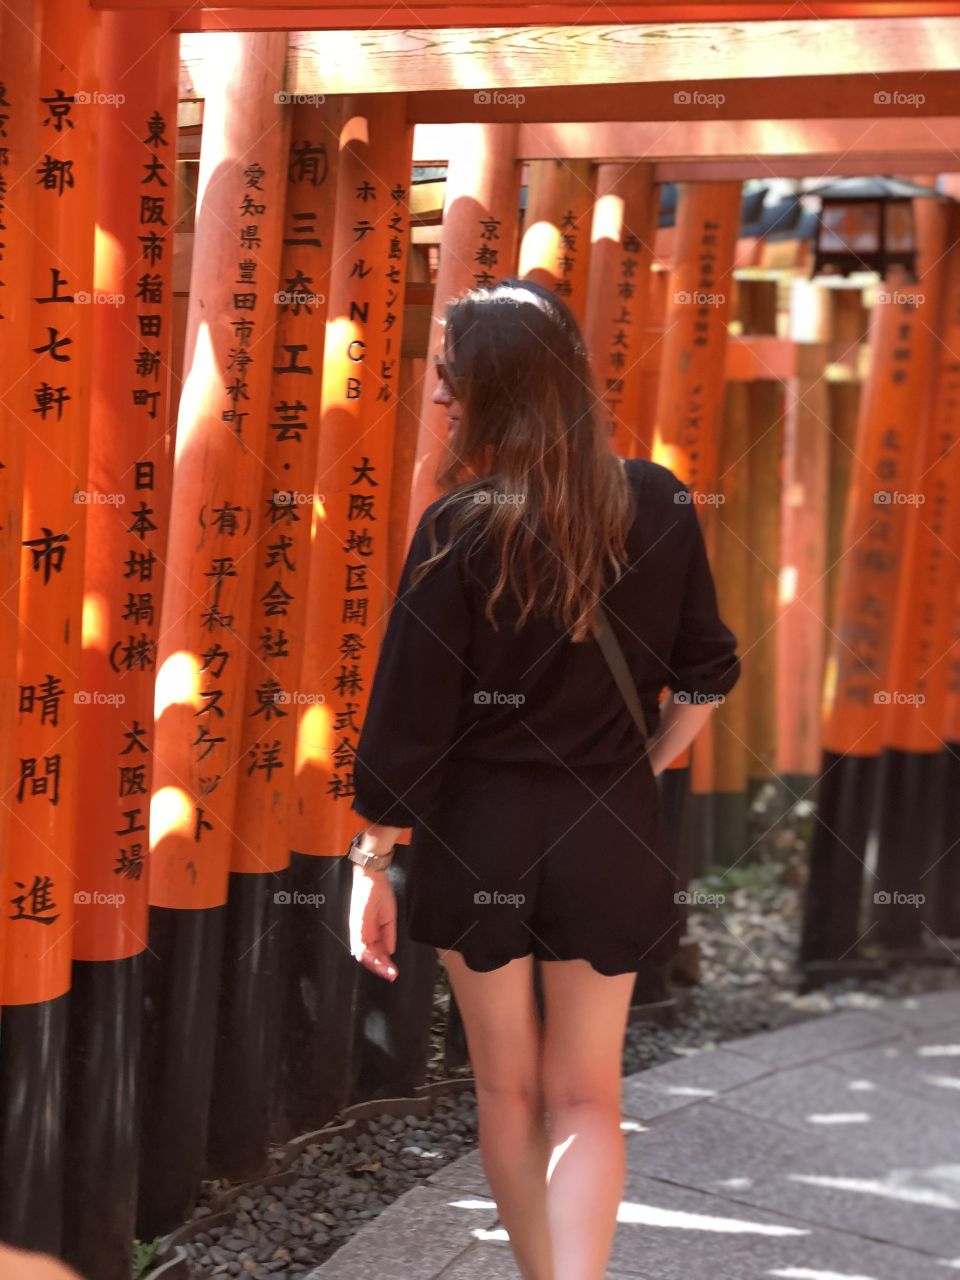 Walking through the gates that lead to holy places at shrine in Kyoto Japan. 